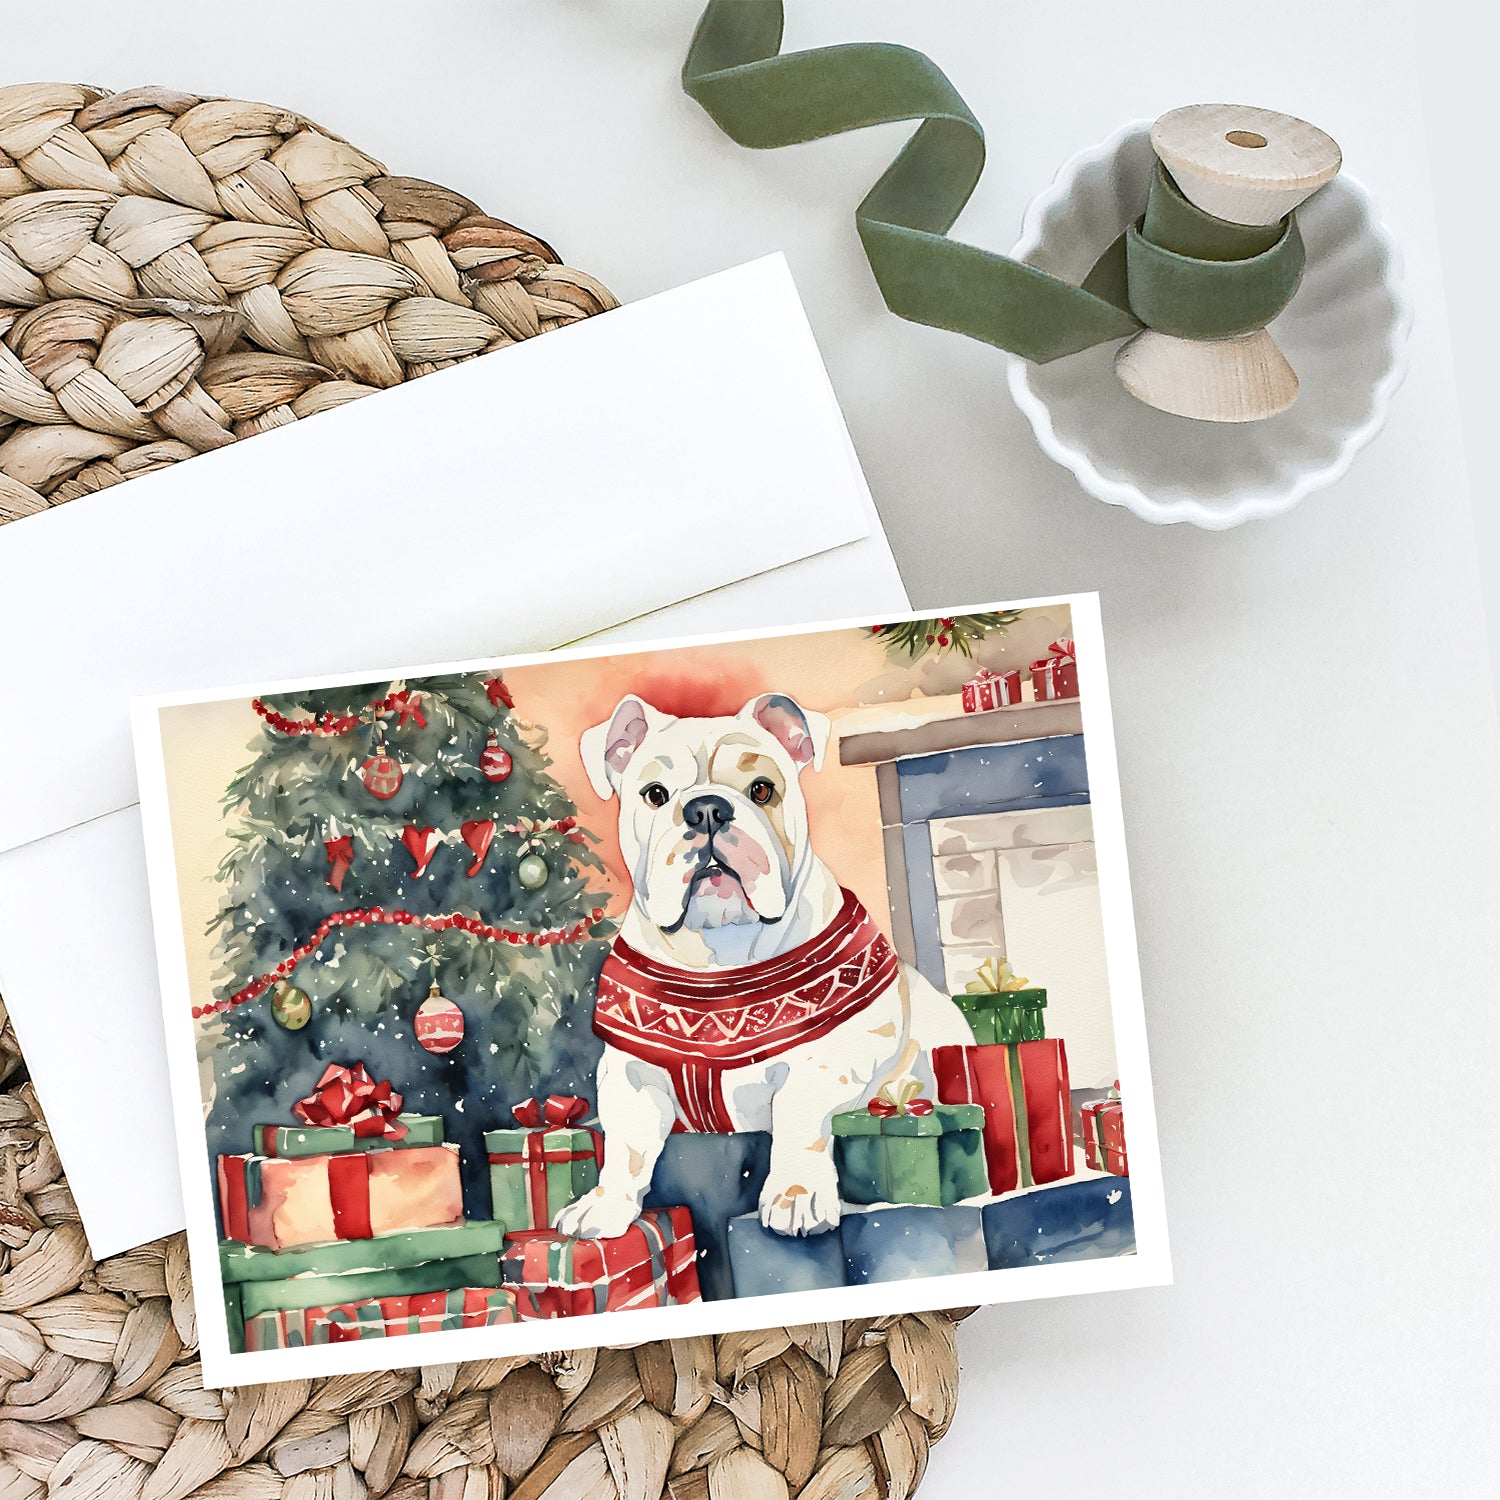 Buy this White English Bulldog Christmas Greeting Cards and Envelopes Pack of 8